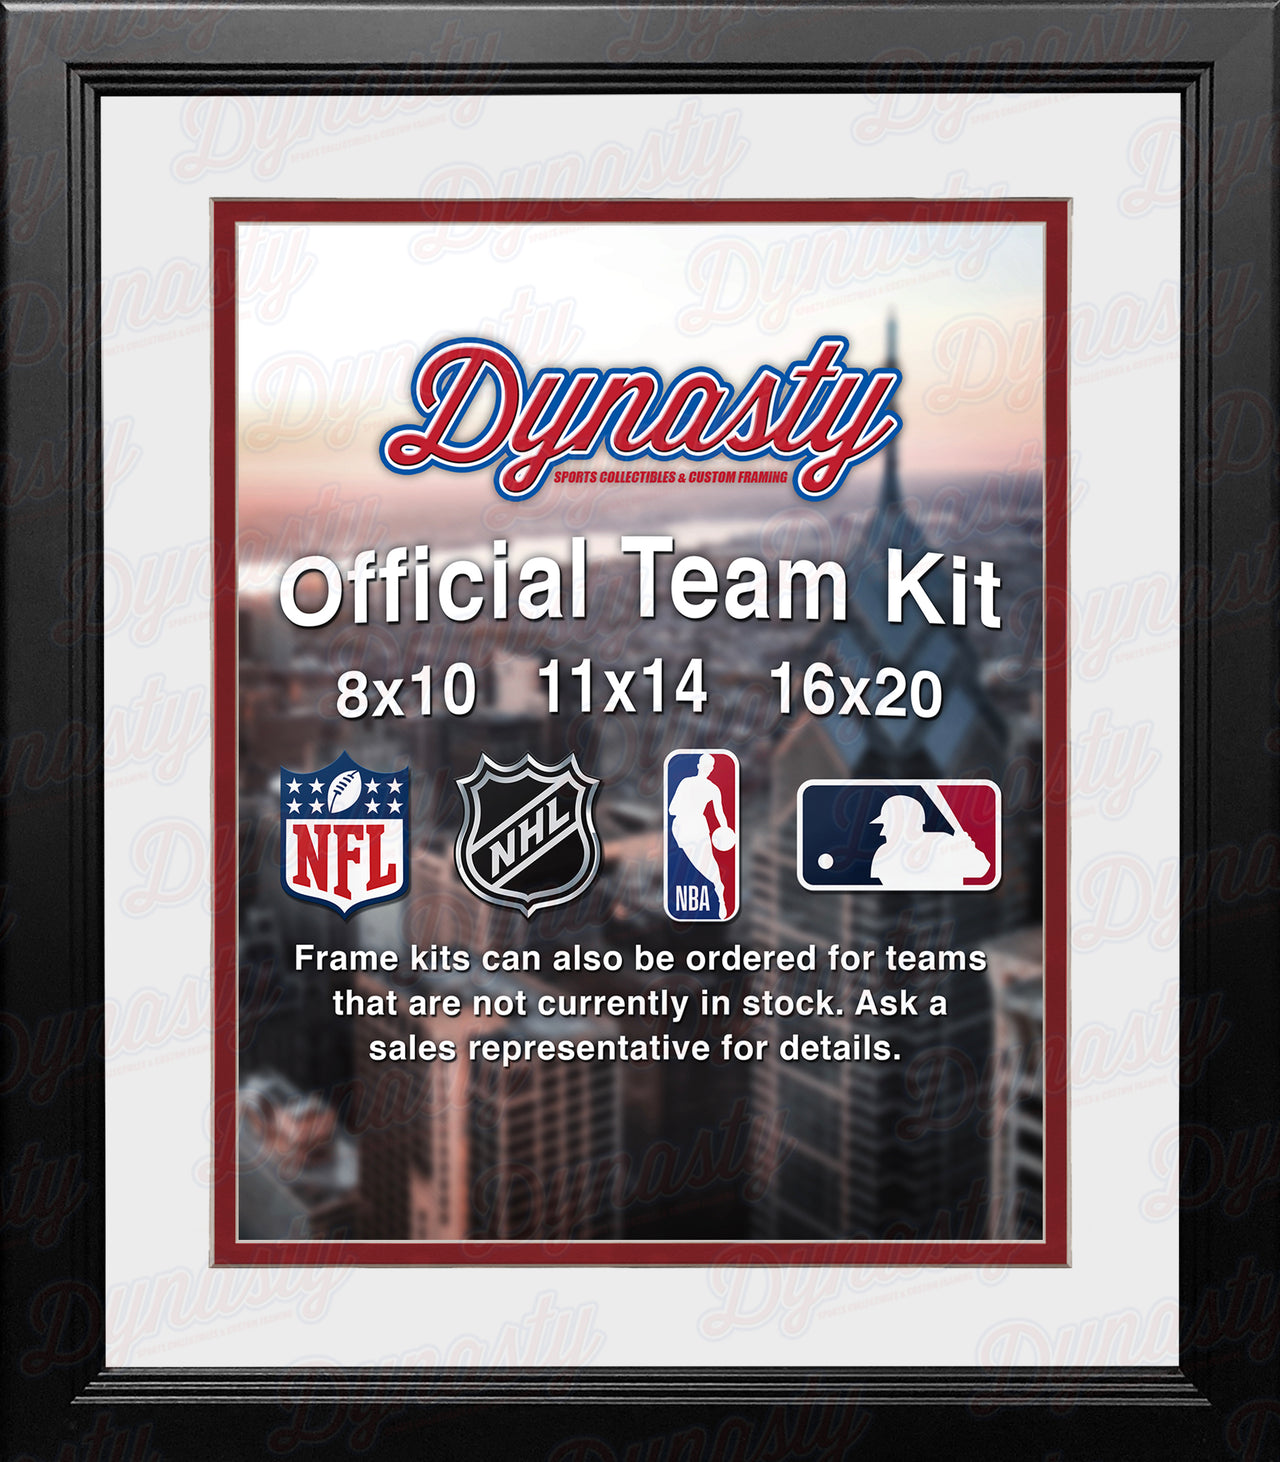 NHL Hockey Photo Picture Frame Kit - Detroit Red Wings (White Matting, Red Trim) - Dynasty Sports & Framing 